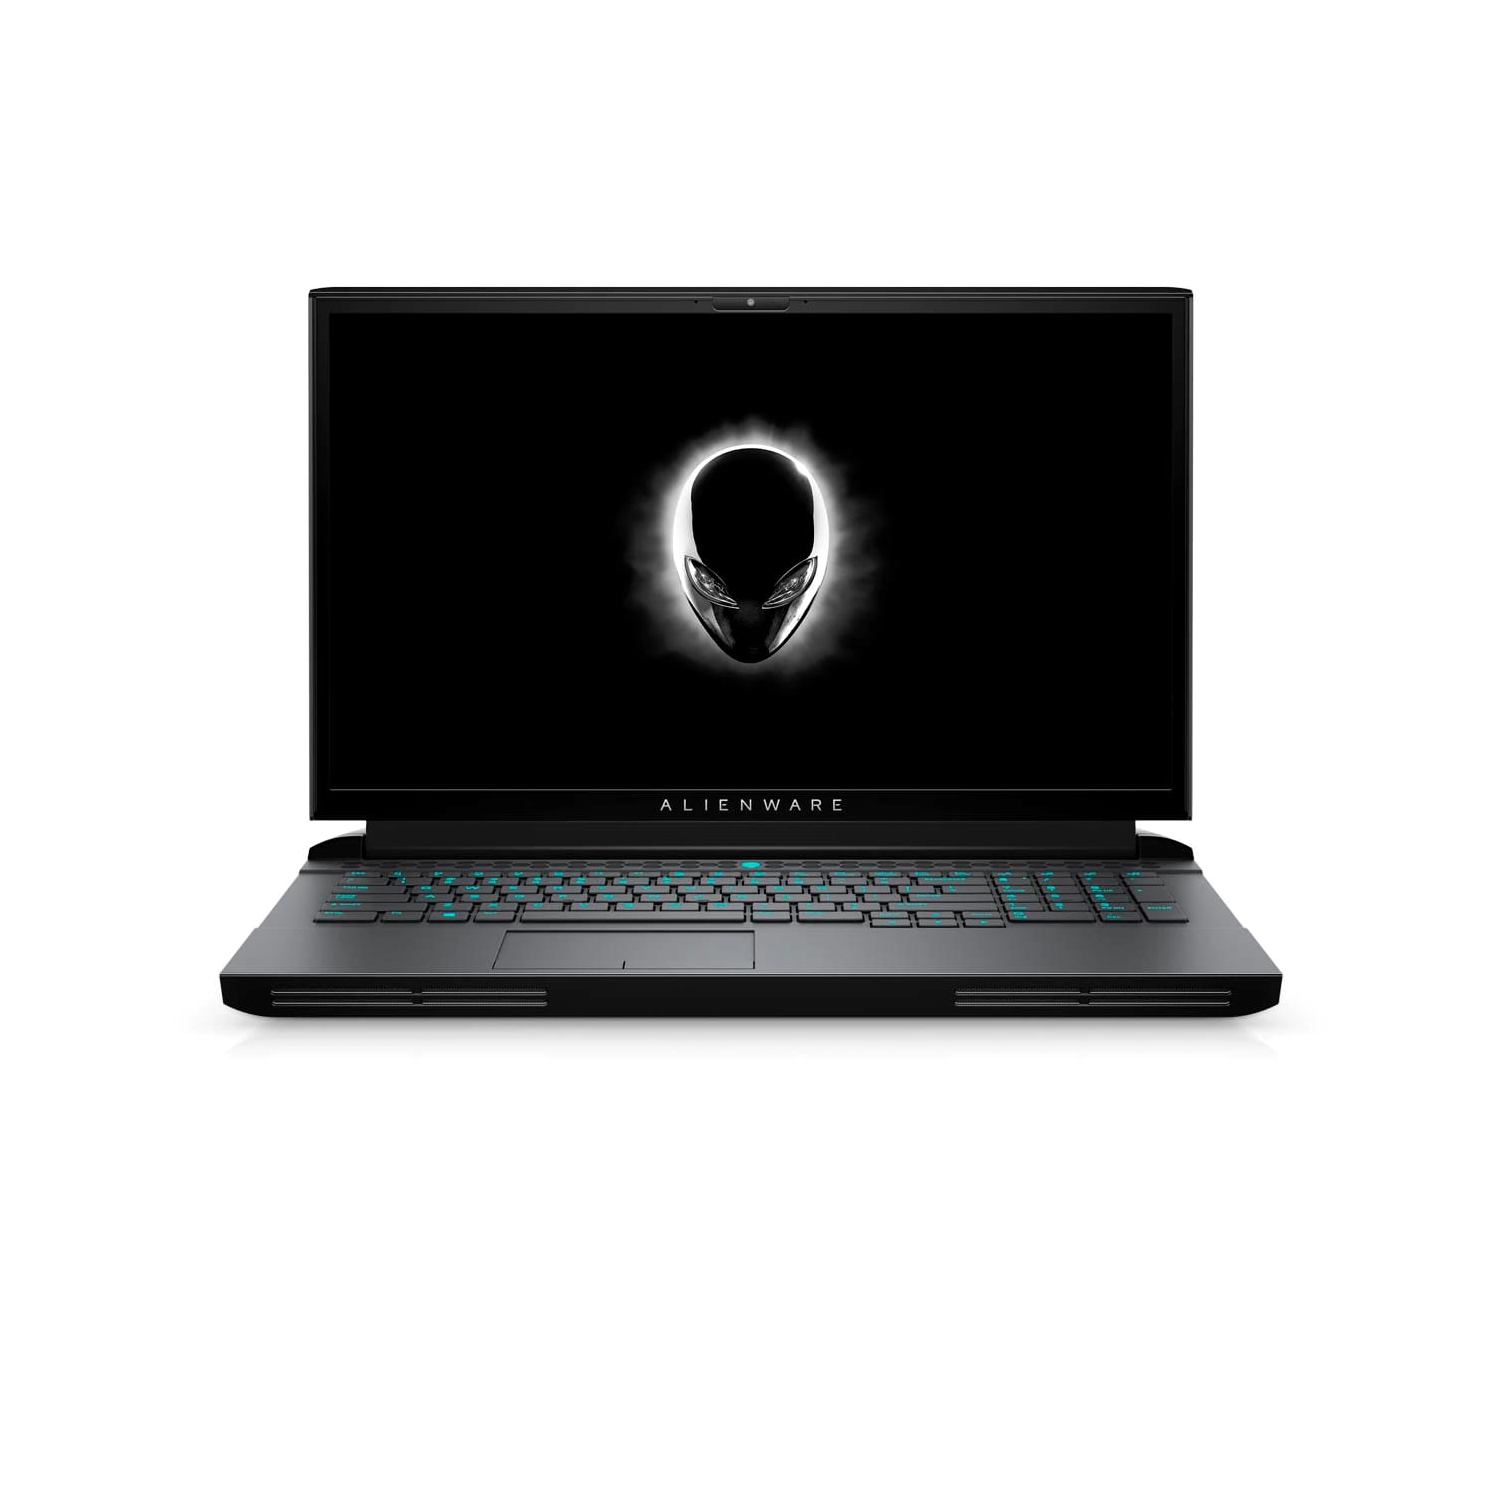 Refurbished (Excellent) - Dell Alienware 17 51m R2 Gaming Laptop (2020), 17.3" FHD, Core i7, 512GB SSD, 16GB RAM, RTX 2060, 8 Cores @ 4.8 GHz, 10th Gen CPU Certified